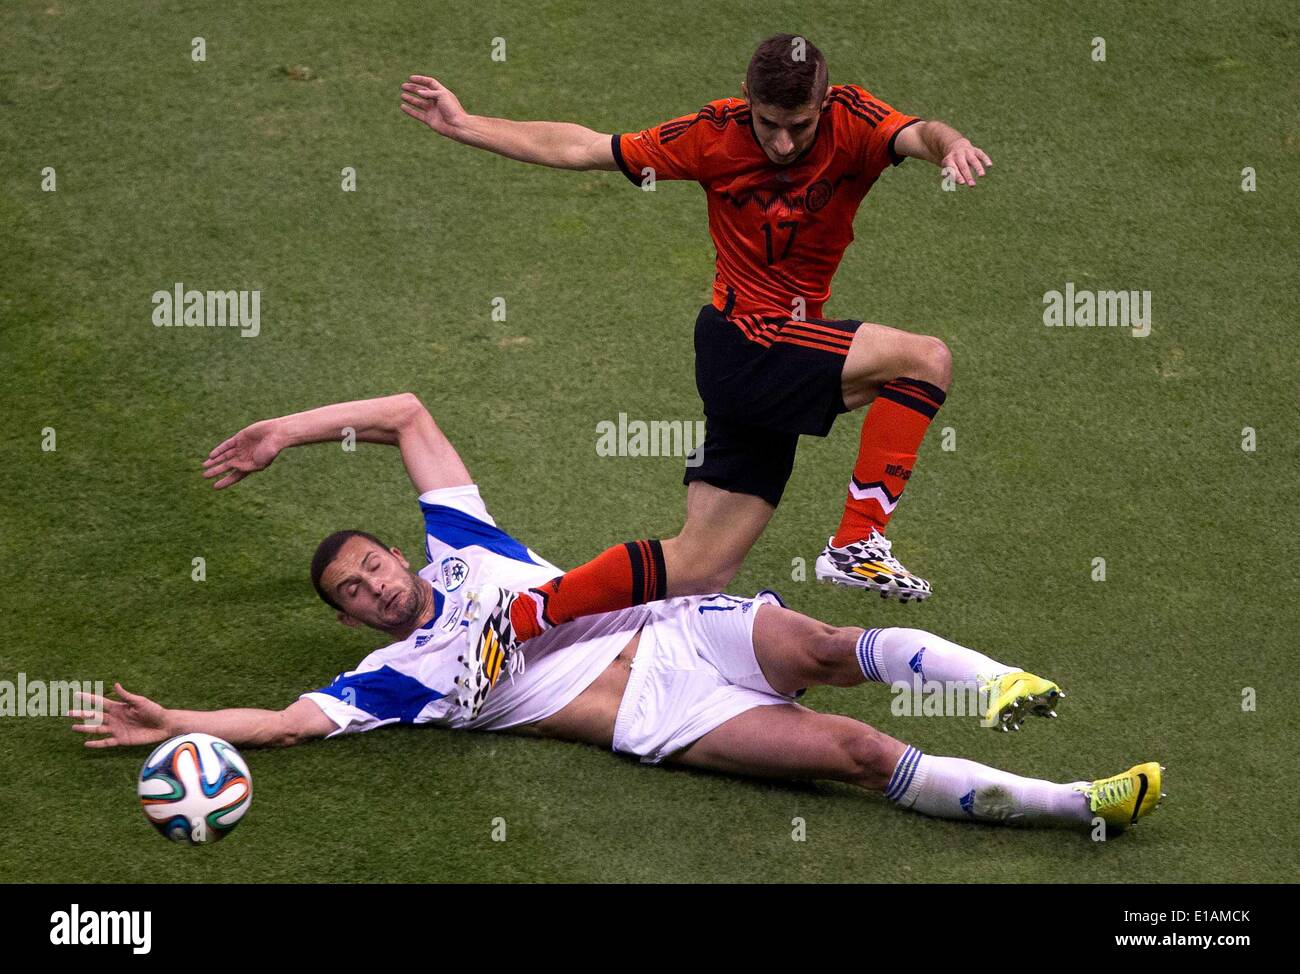 Mexico City, Mexico. 28th May, 2014. Isaac Brizuela (R) from Mexico vies for the ball with Ben Sahar from Israel during a friendly match at the Azteca Stadium in Mexico City, capital of Mexico, on May 28, 2014. Credit:  David de la Paz/Xinhua/Alamy Live News Stock Photo